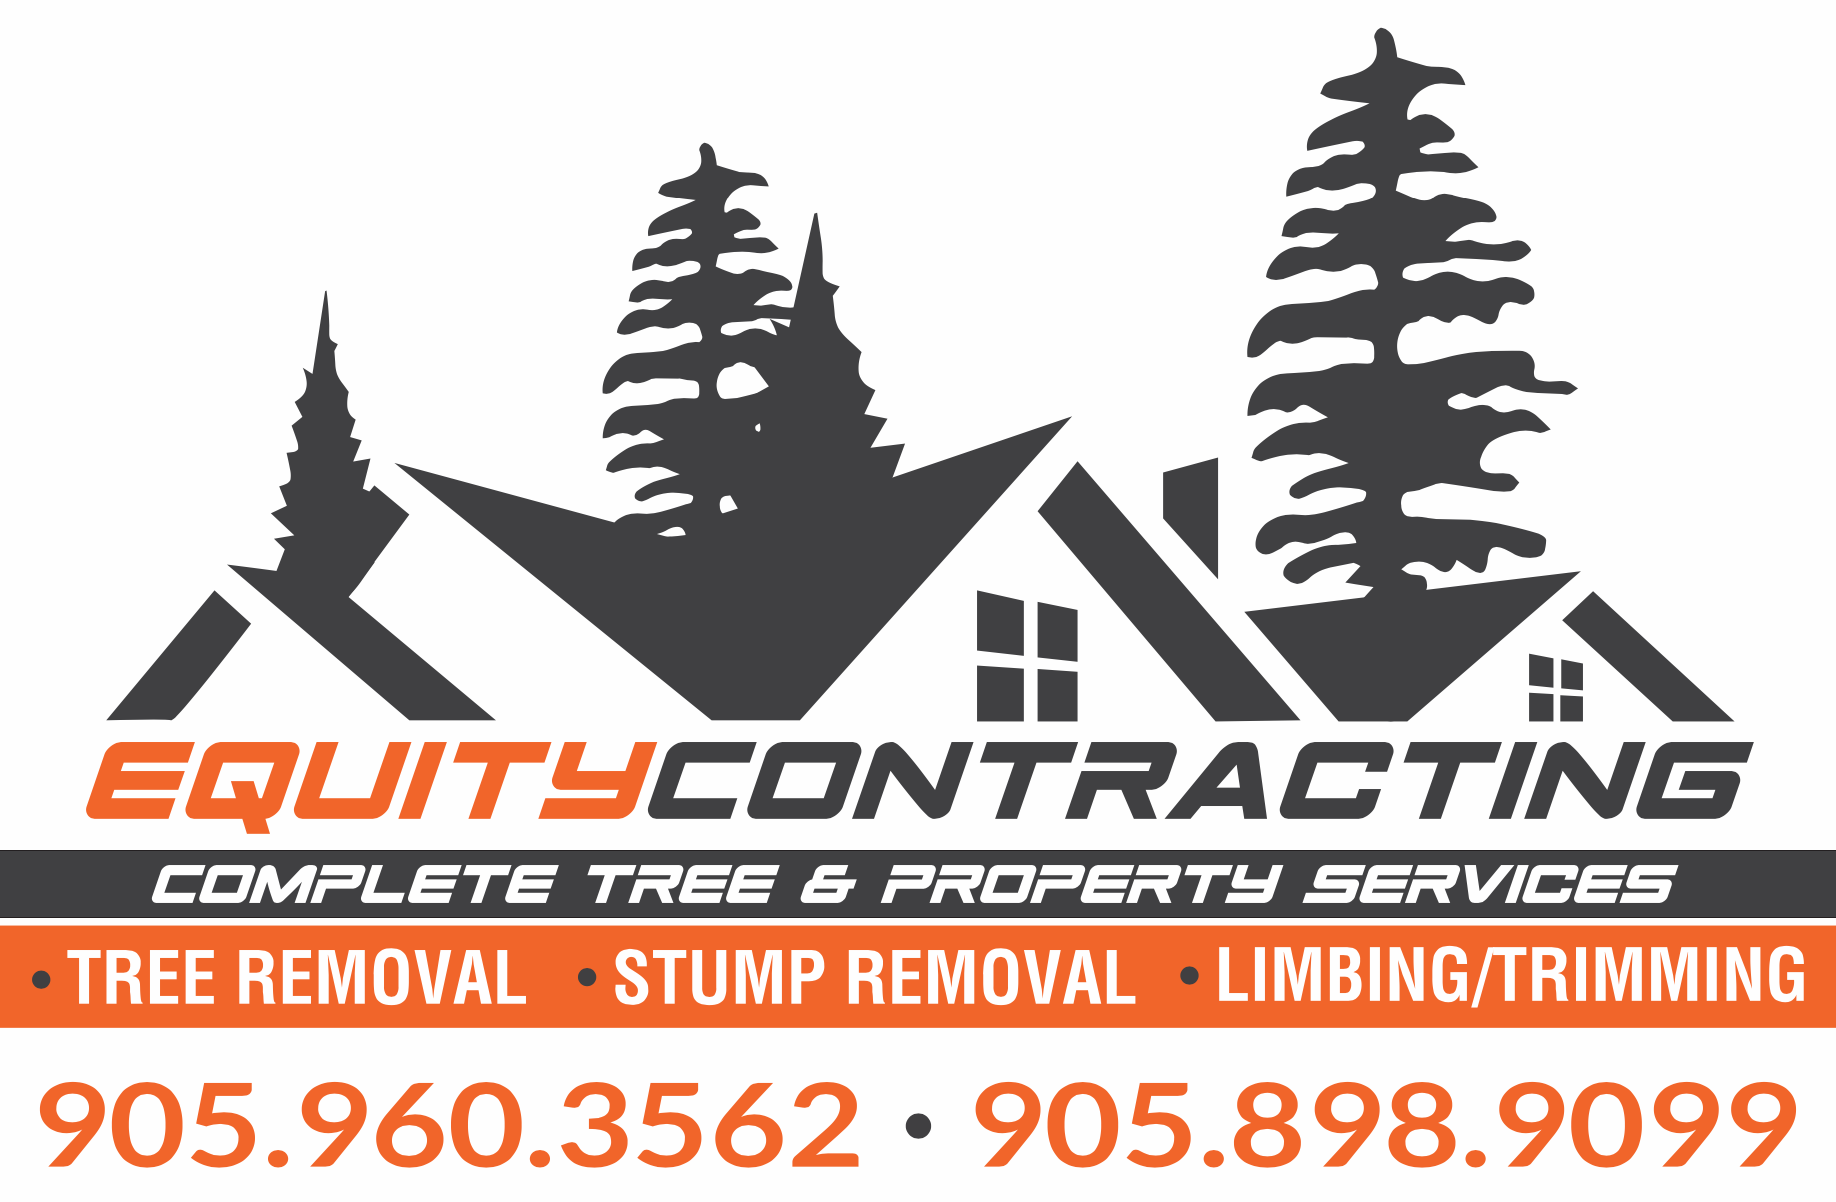 Equity Contracting